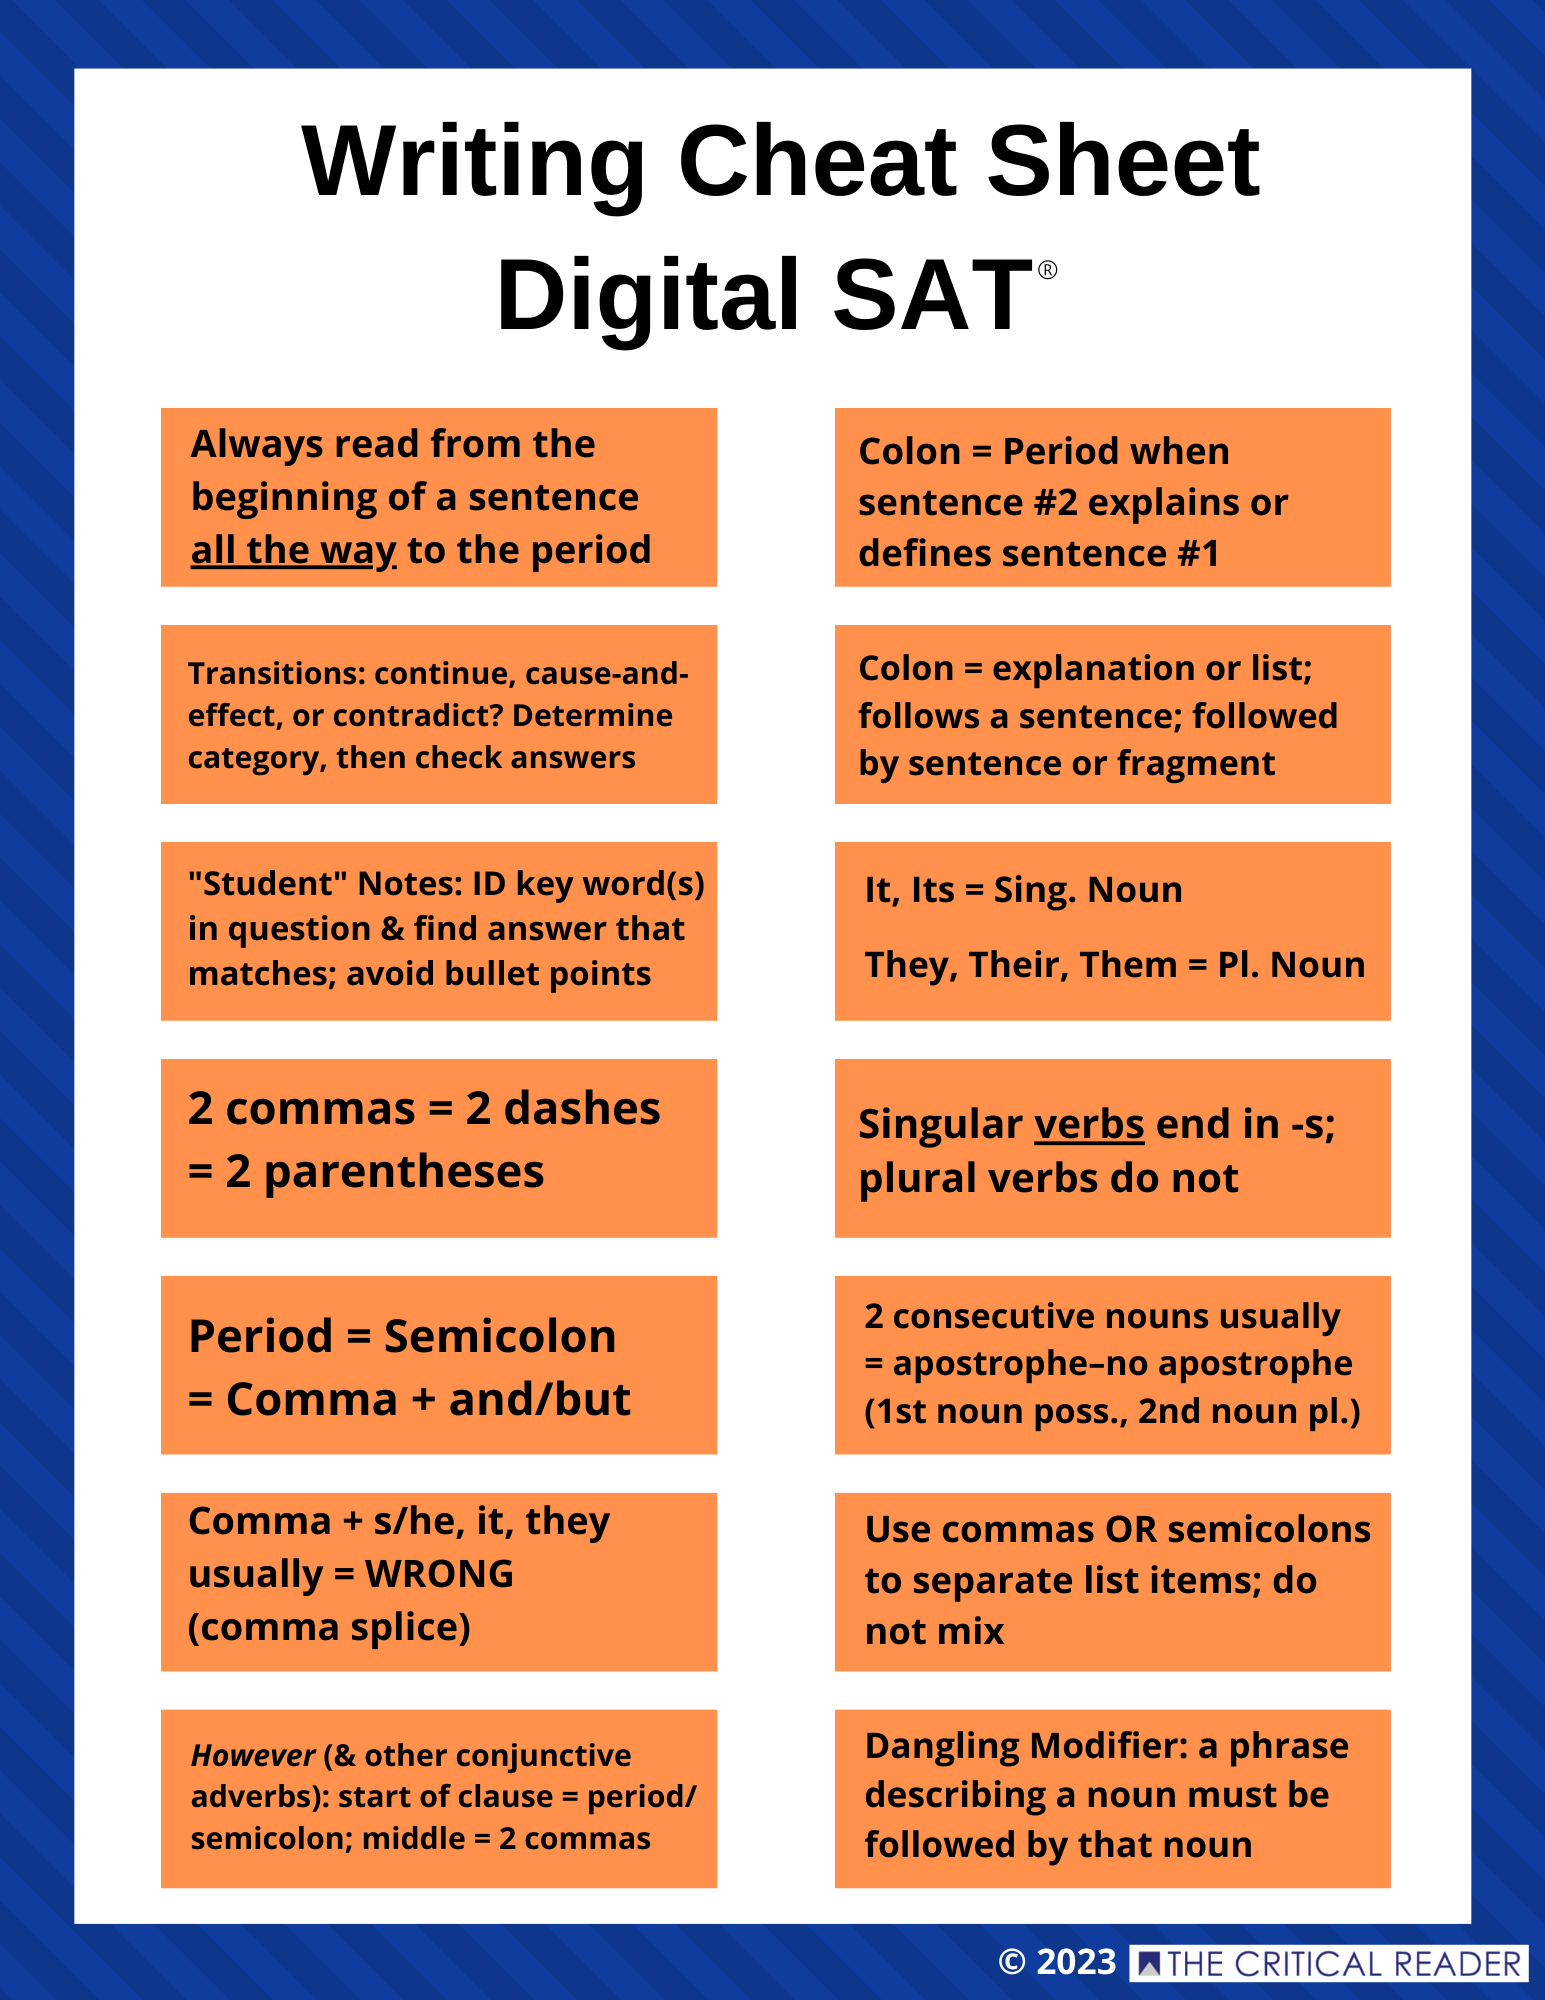 does the digital sat have an essay